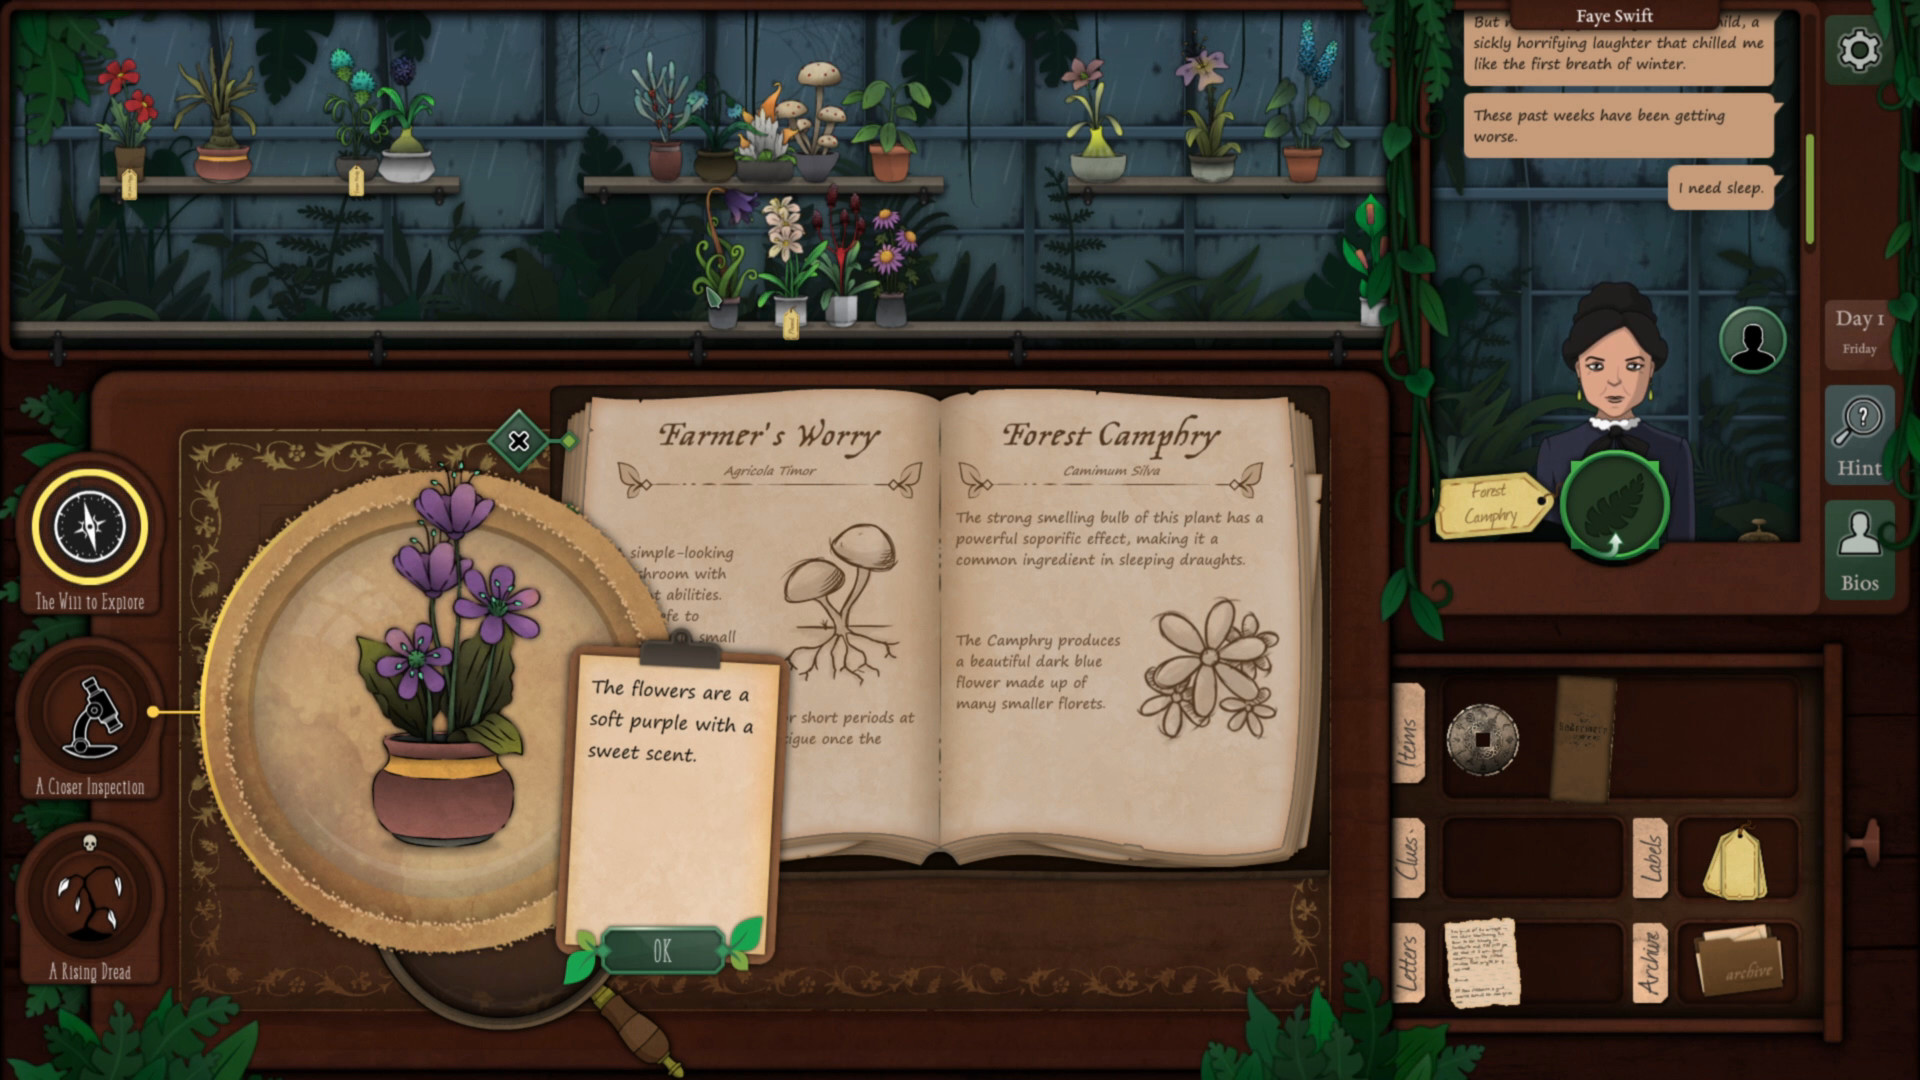 Early Access Launch! · Ogu and the Secret Forest update for 24 March 2023 ·  SteamDB